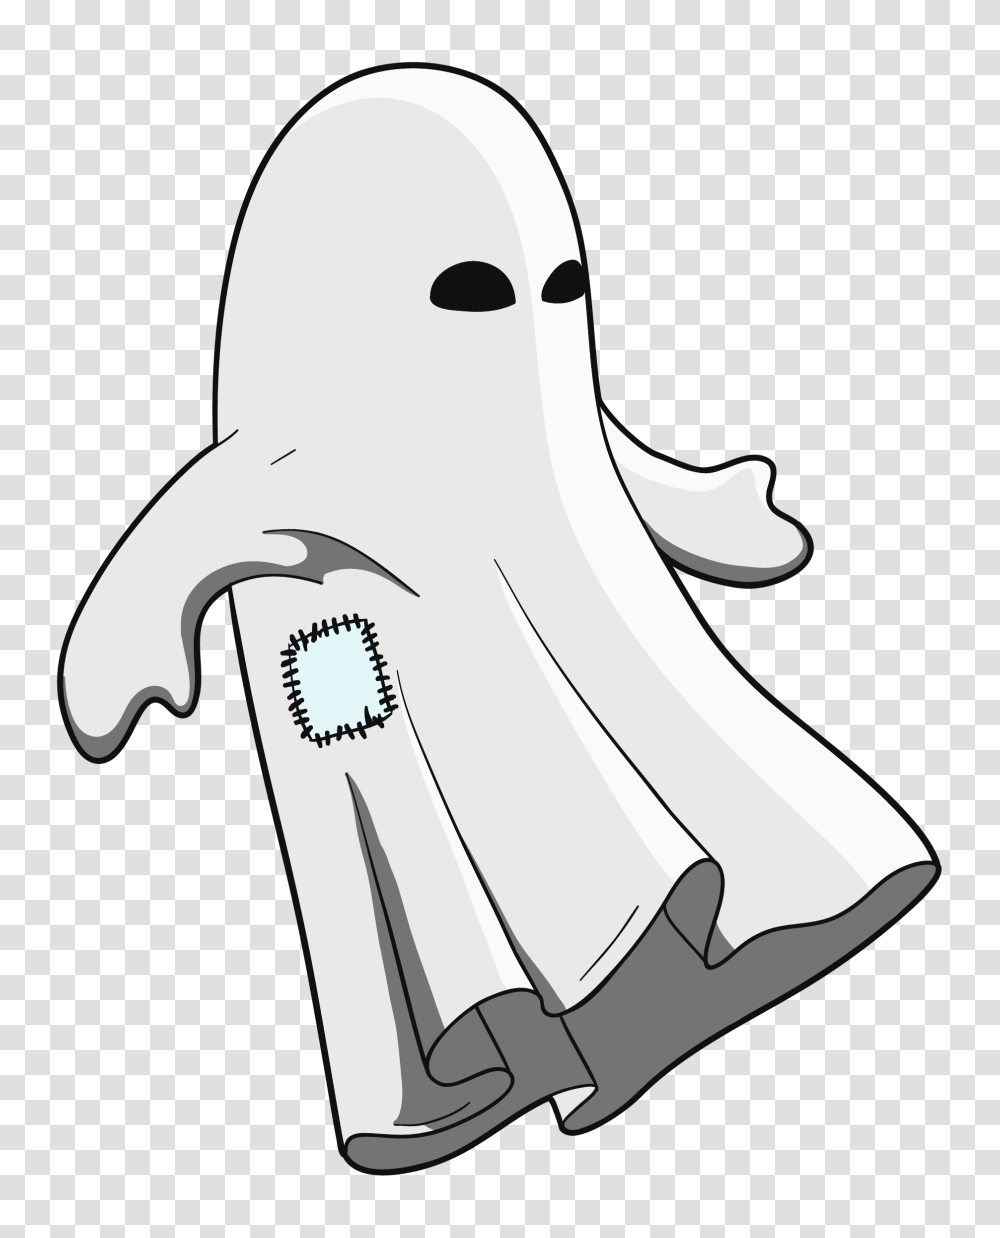 Free Ghost Download Clip Art Halloween Ghost Clipart, Axe, Tool, Clothing, Hammer Transparent Png